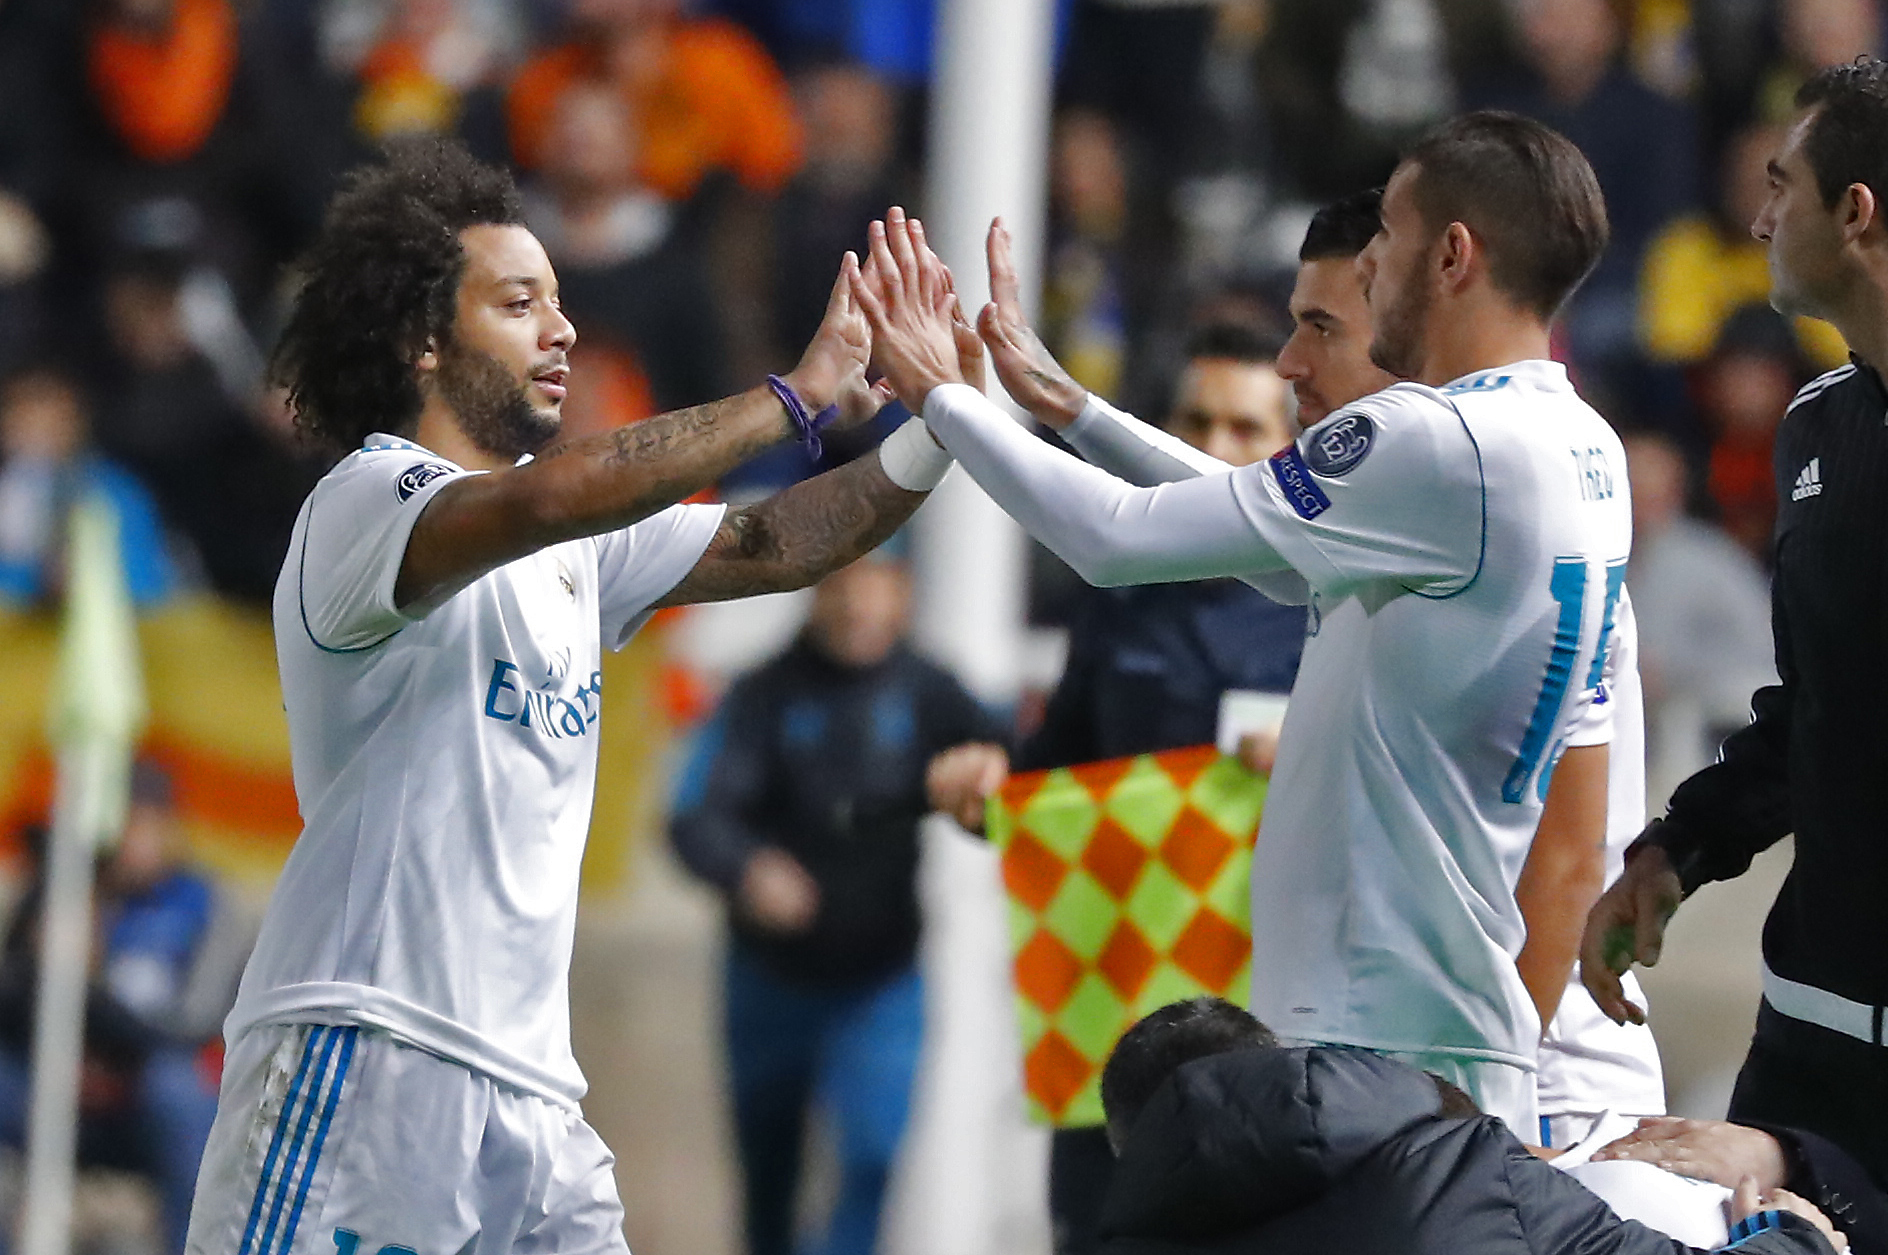 Real Madrid Vs Malaga Team News Preview Live Stream Tv Info Bleacher Report Latest News Videos And Highlights